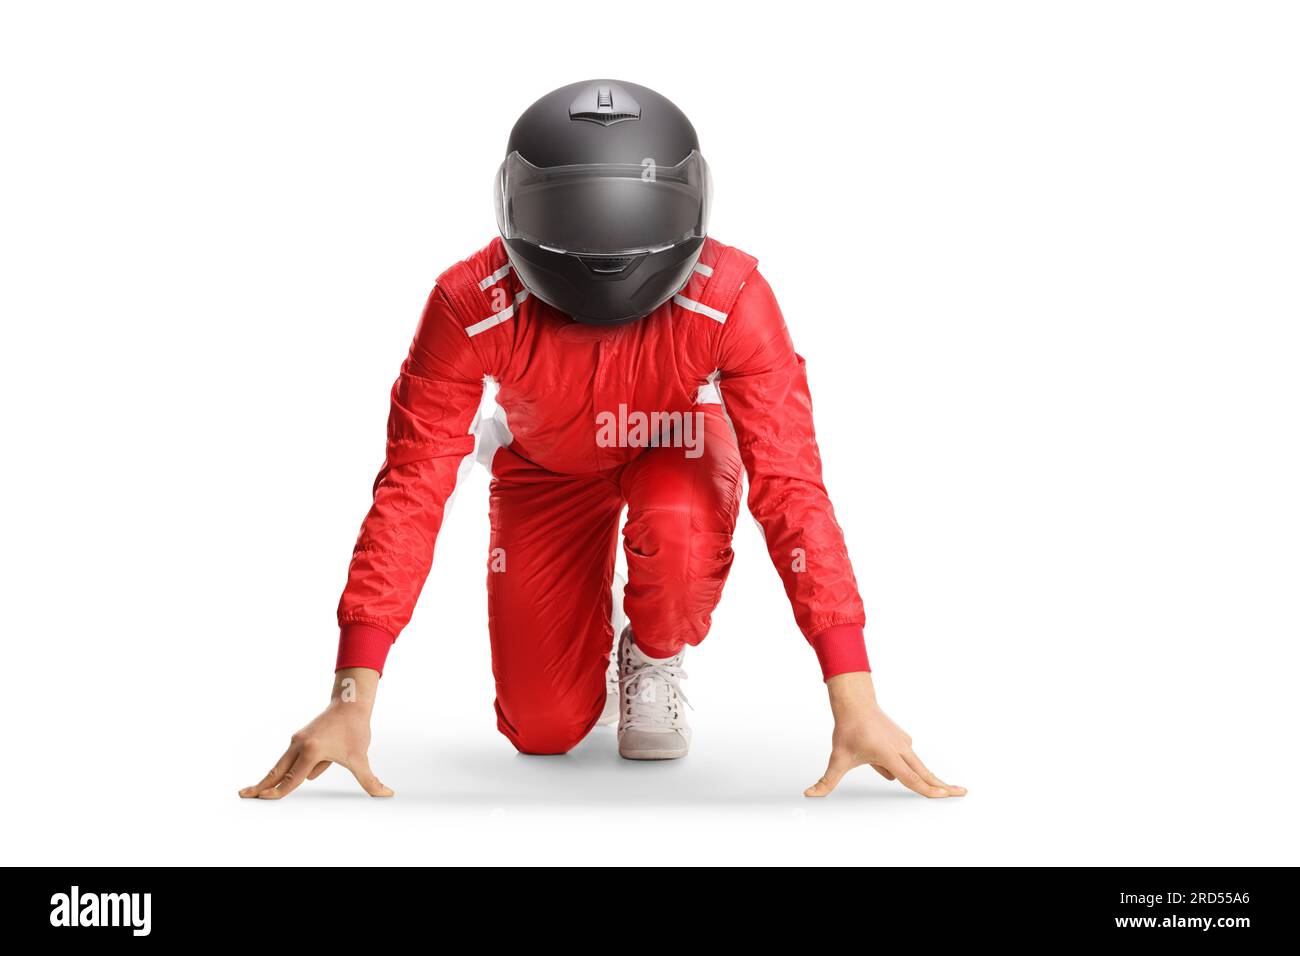 Car racer with a helmet in a start running position isolated on white background Stock Photo